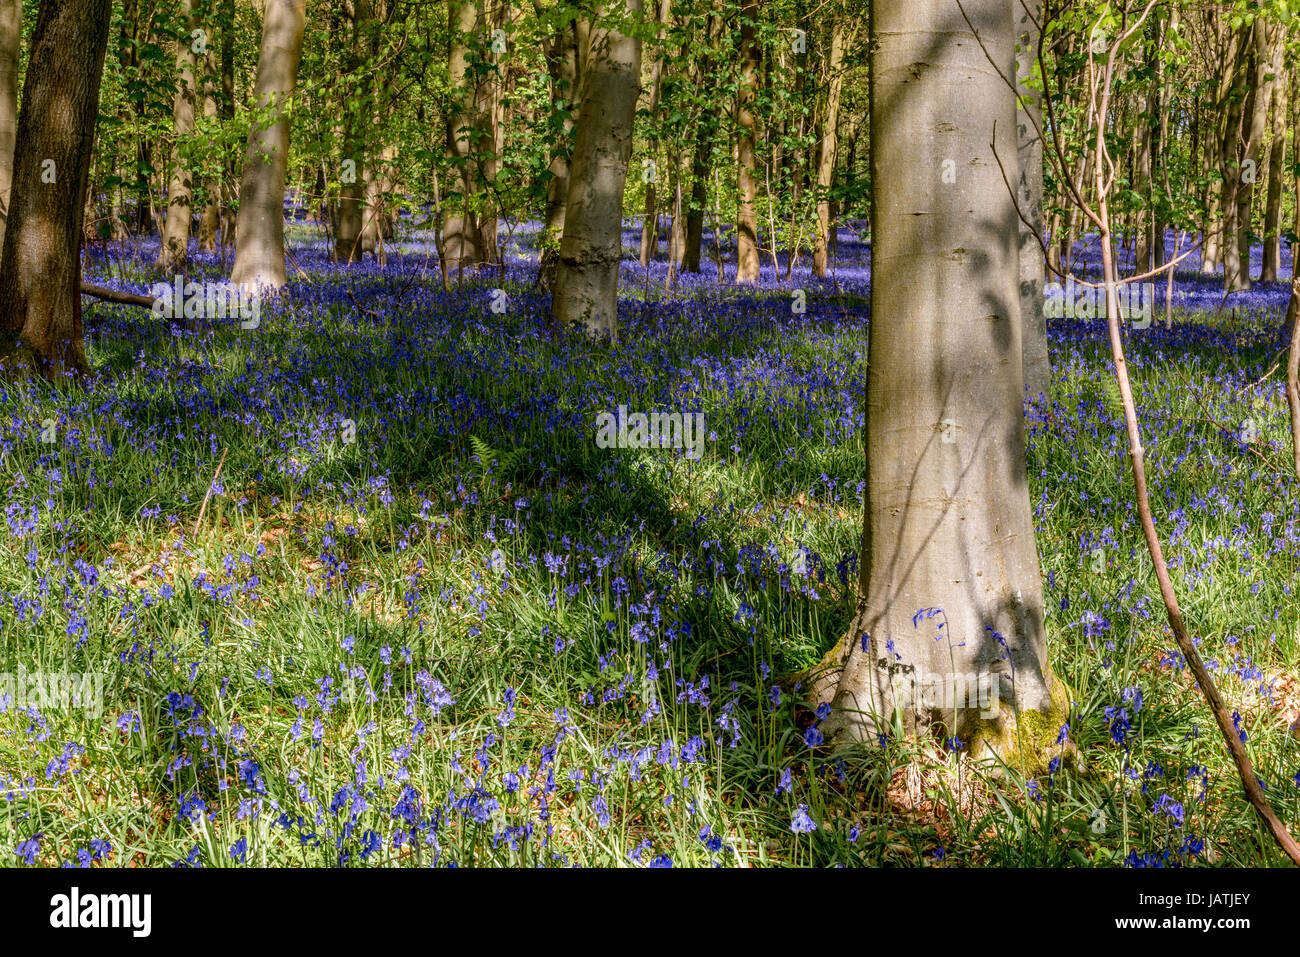 Bluebell wood in full bloom on a sunny spring day Stock Photo